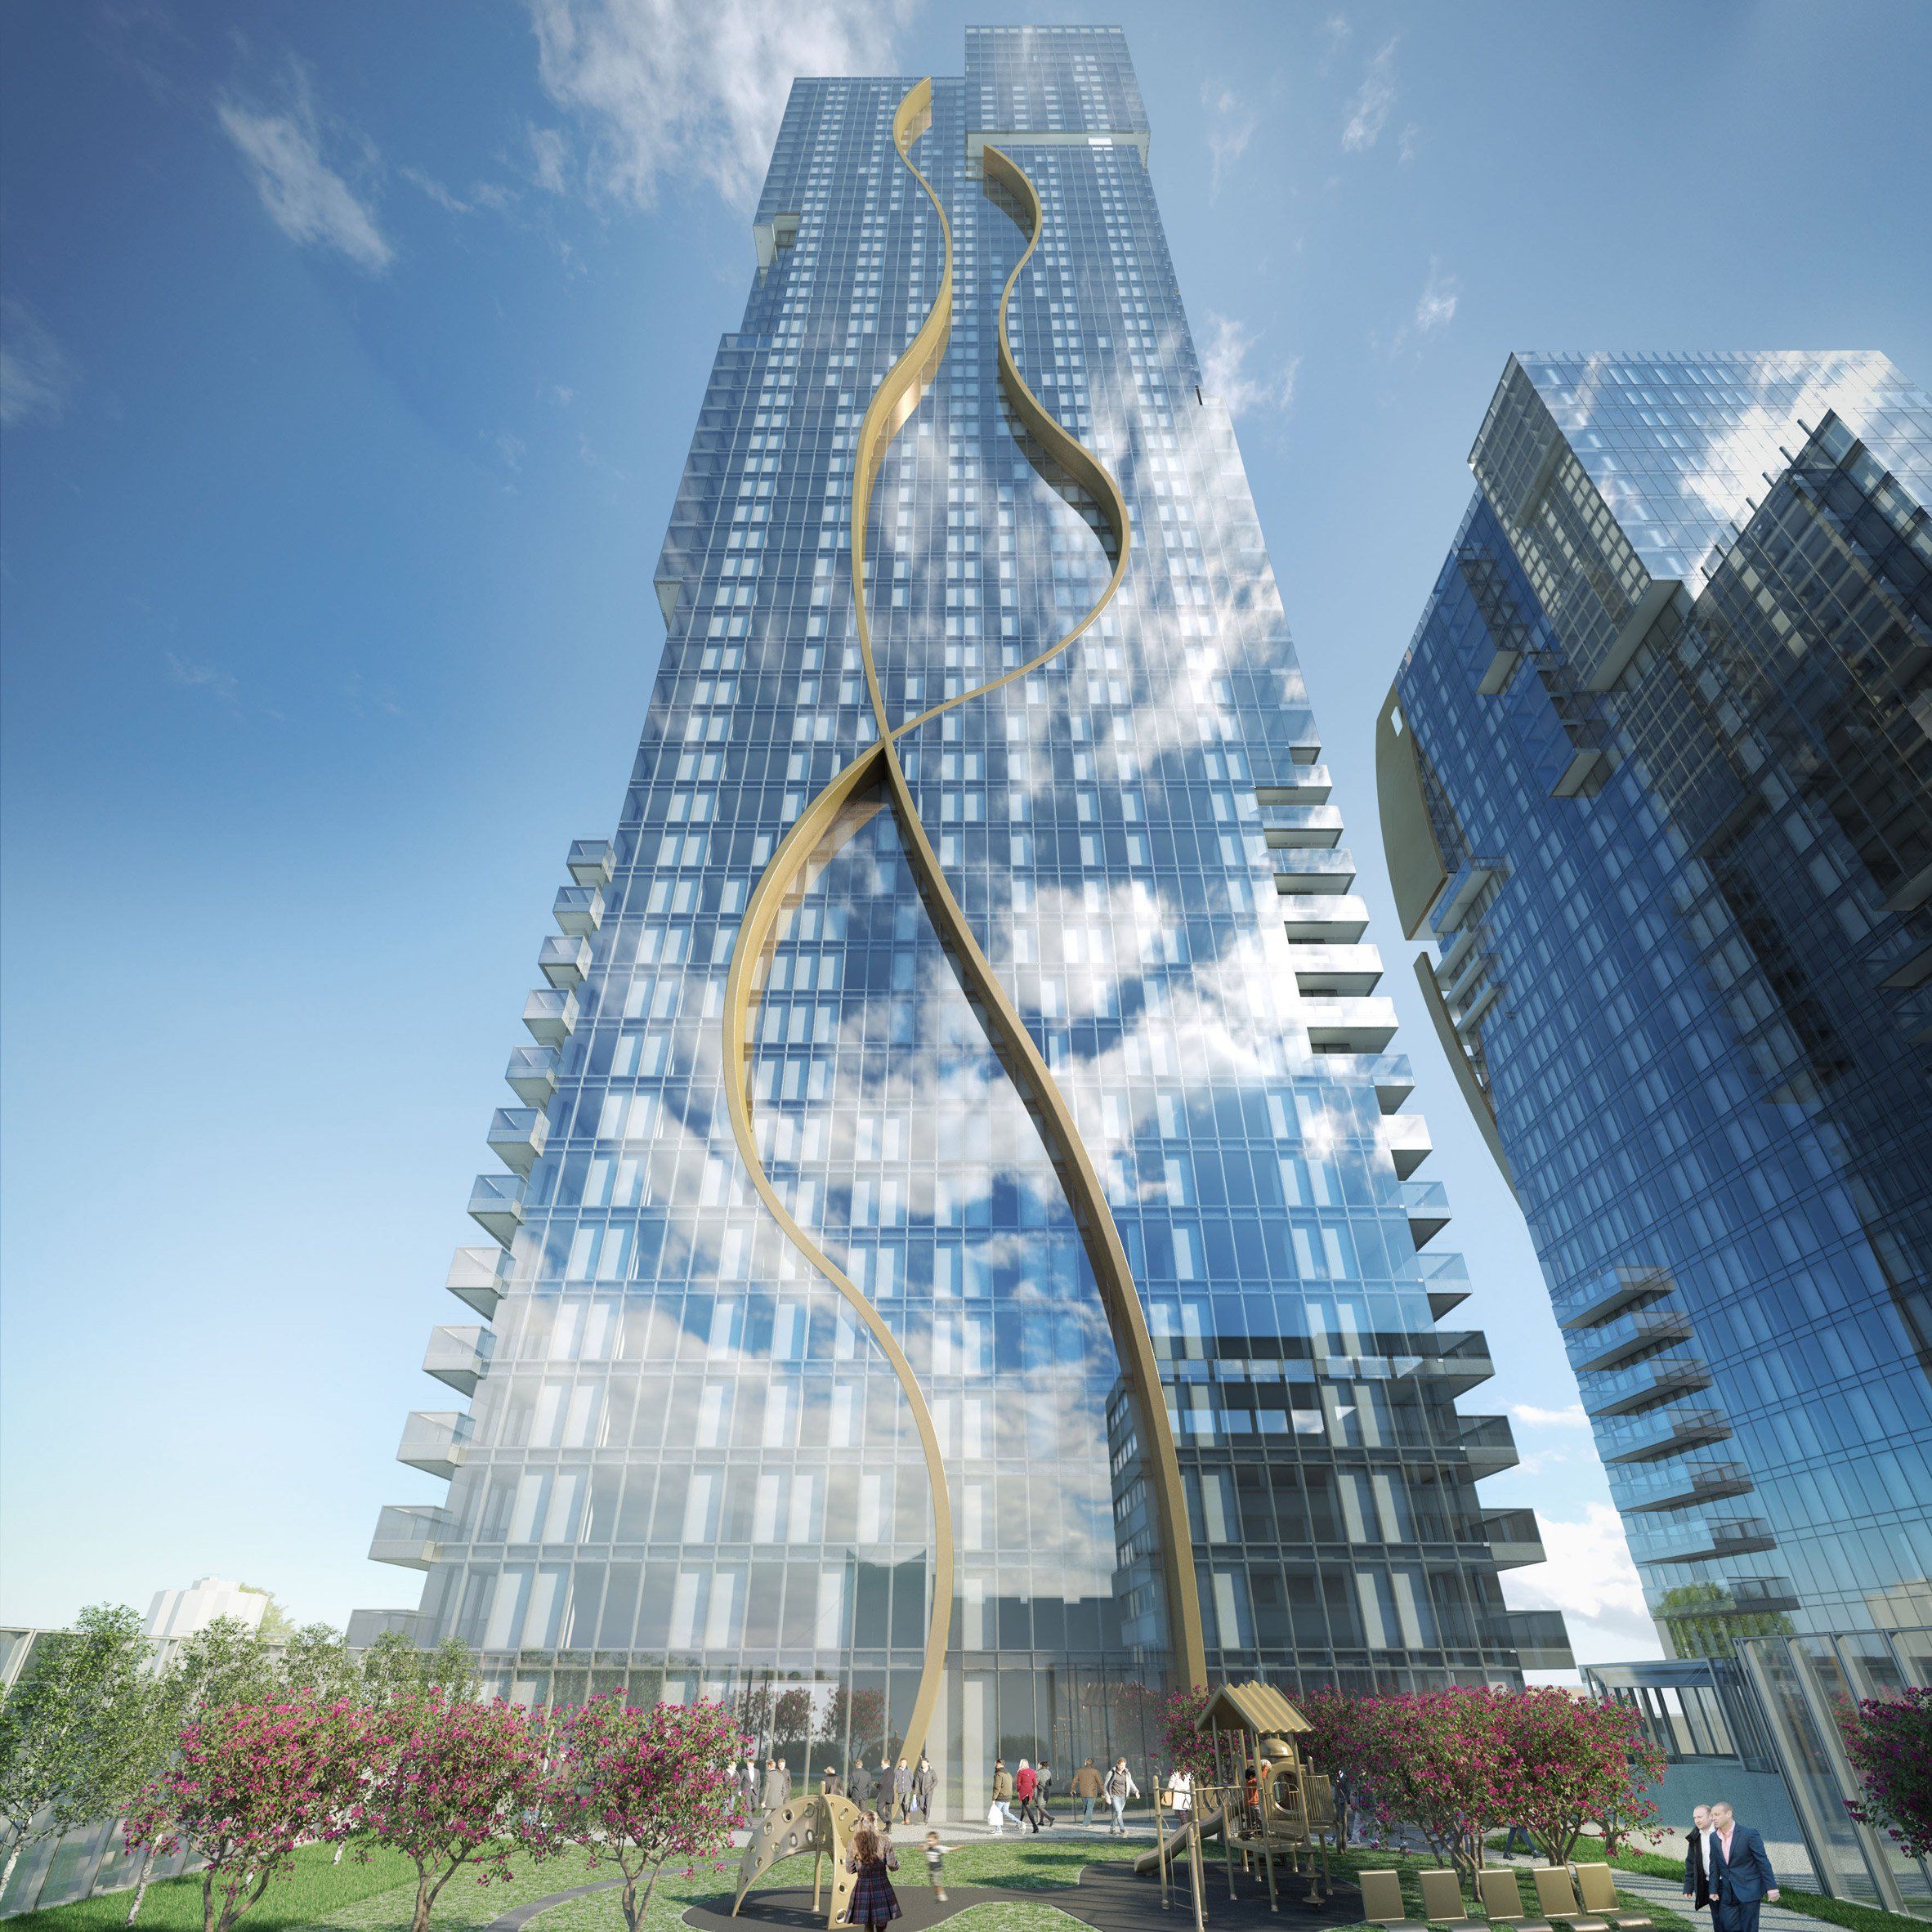 Architecture studio CZWG is preparing to build a 228-metre-high ...